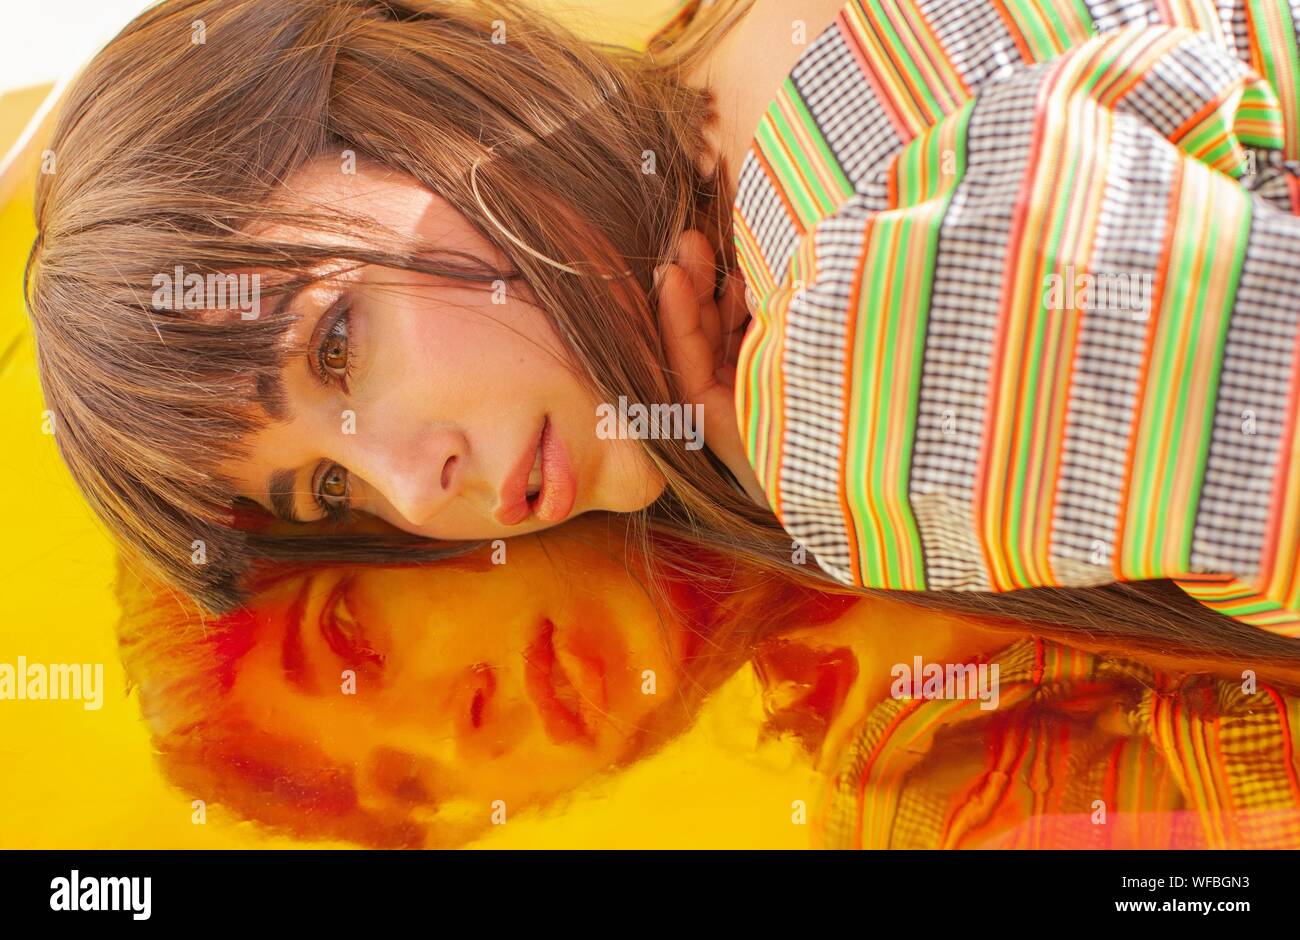 Portrait of a woman lying on holographic foil Stock Photo